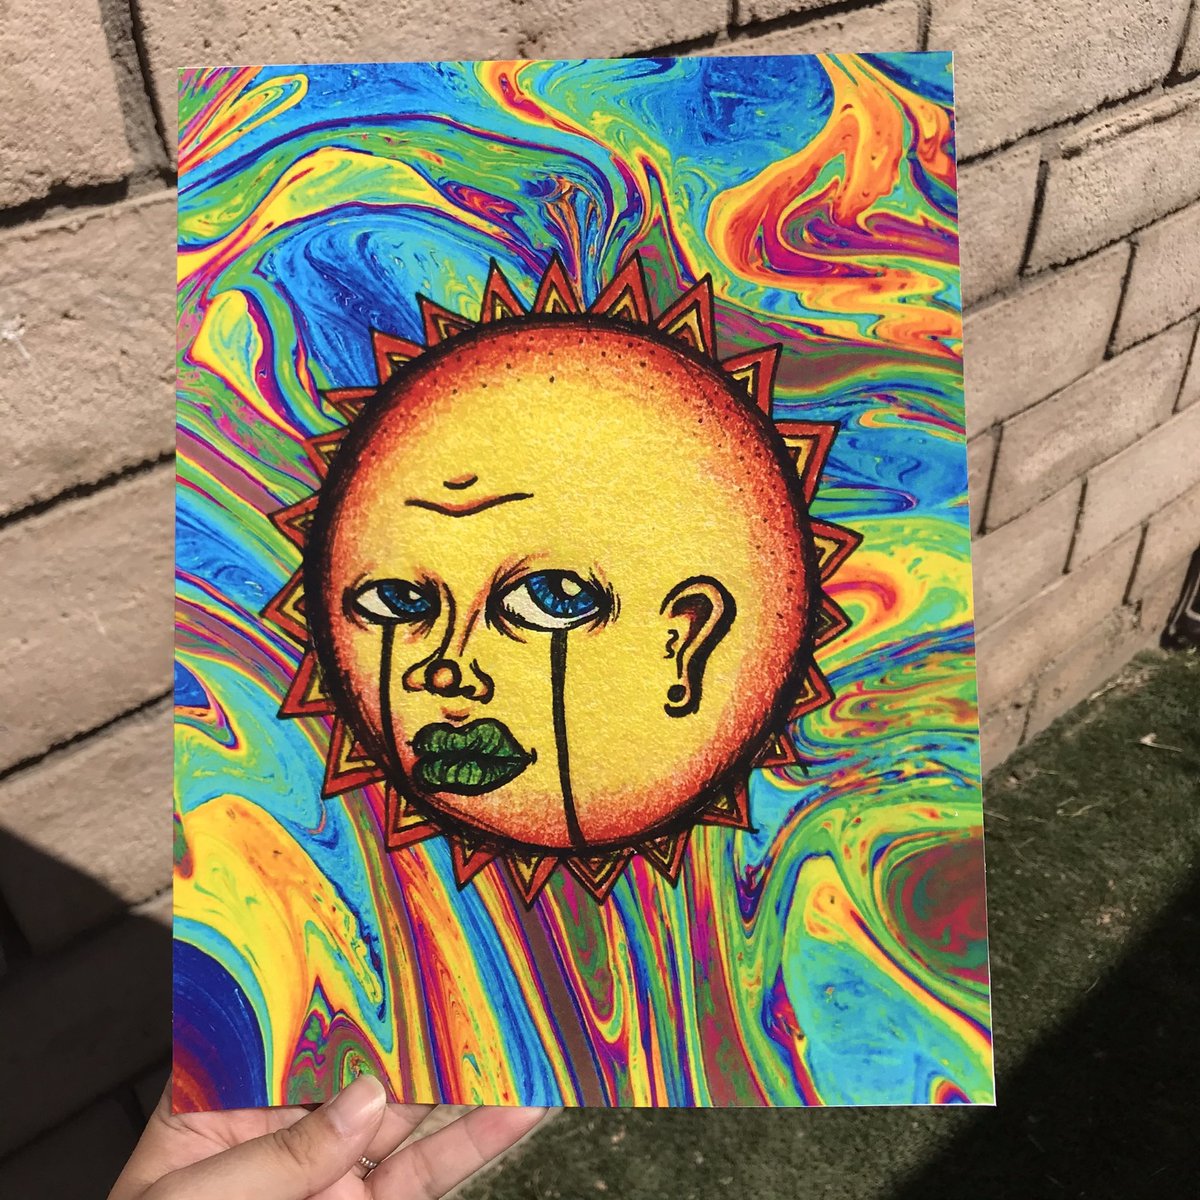 MEET JESSIE:Hello! I’m Jessie  @JessieFlysHigh_ I make mixed media art/digital collages of my drawings and paintings. I sell prints, stickers, keychains, handbags and other cute things with my art on them in my shop  http://weirdmind.bigcartel.com   https://twitter.com/messages/media/1264766999021760516